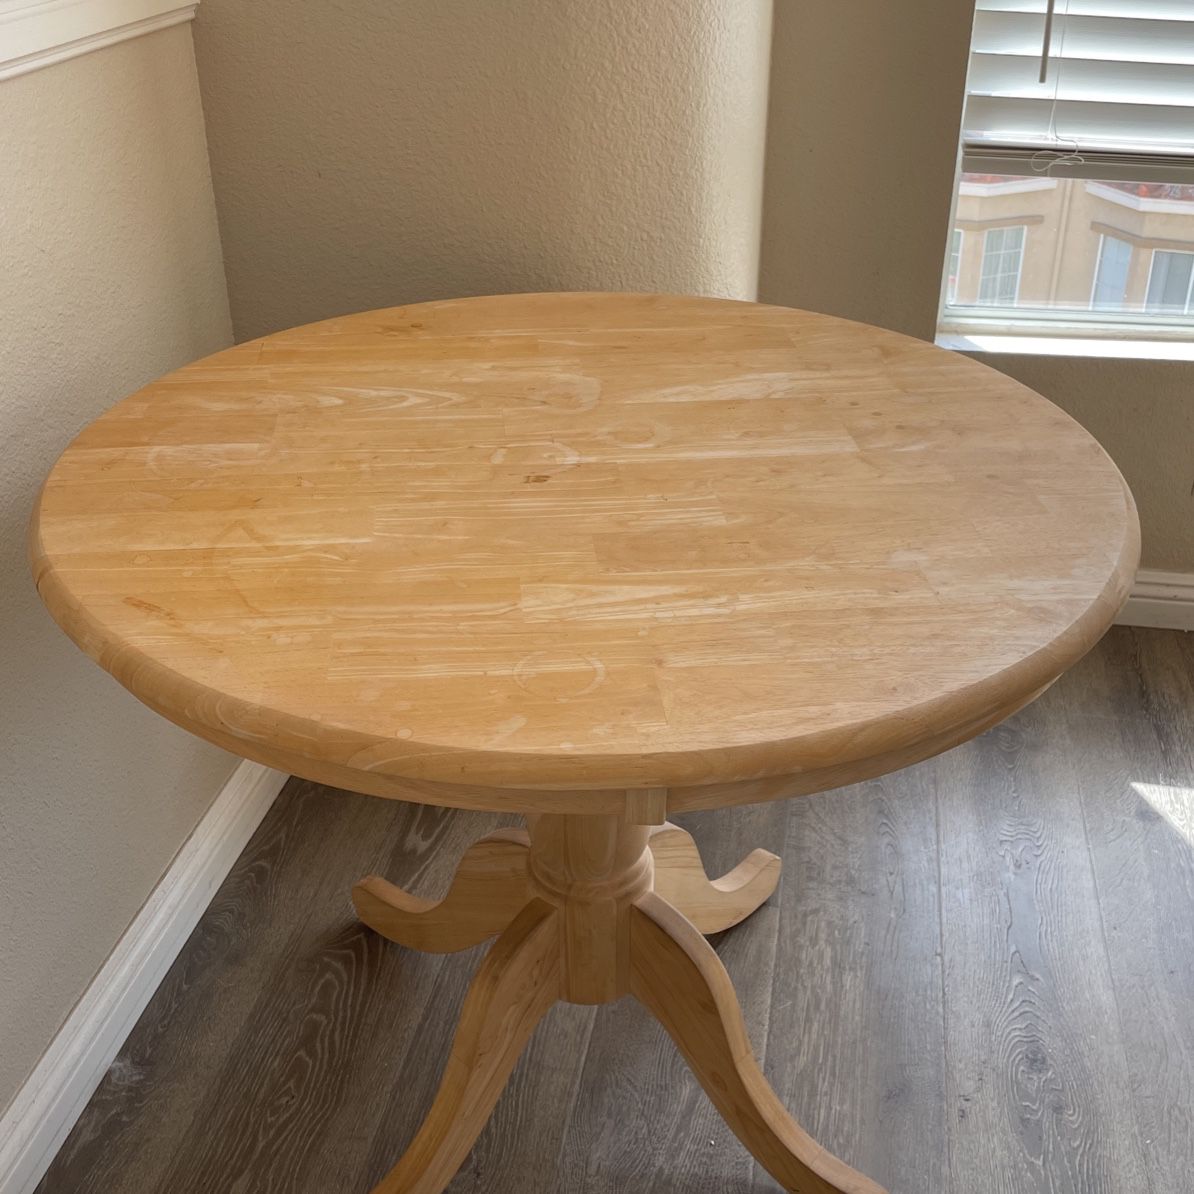 Unfinished Wooden Table